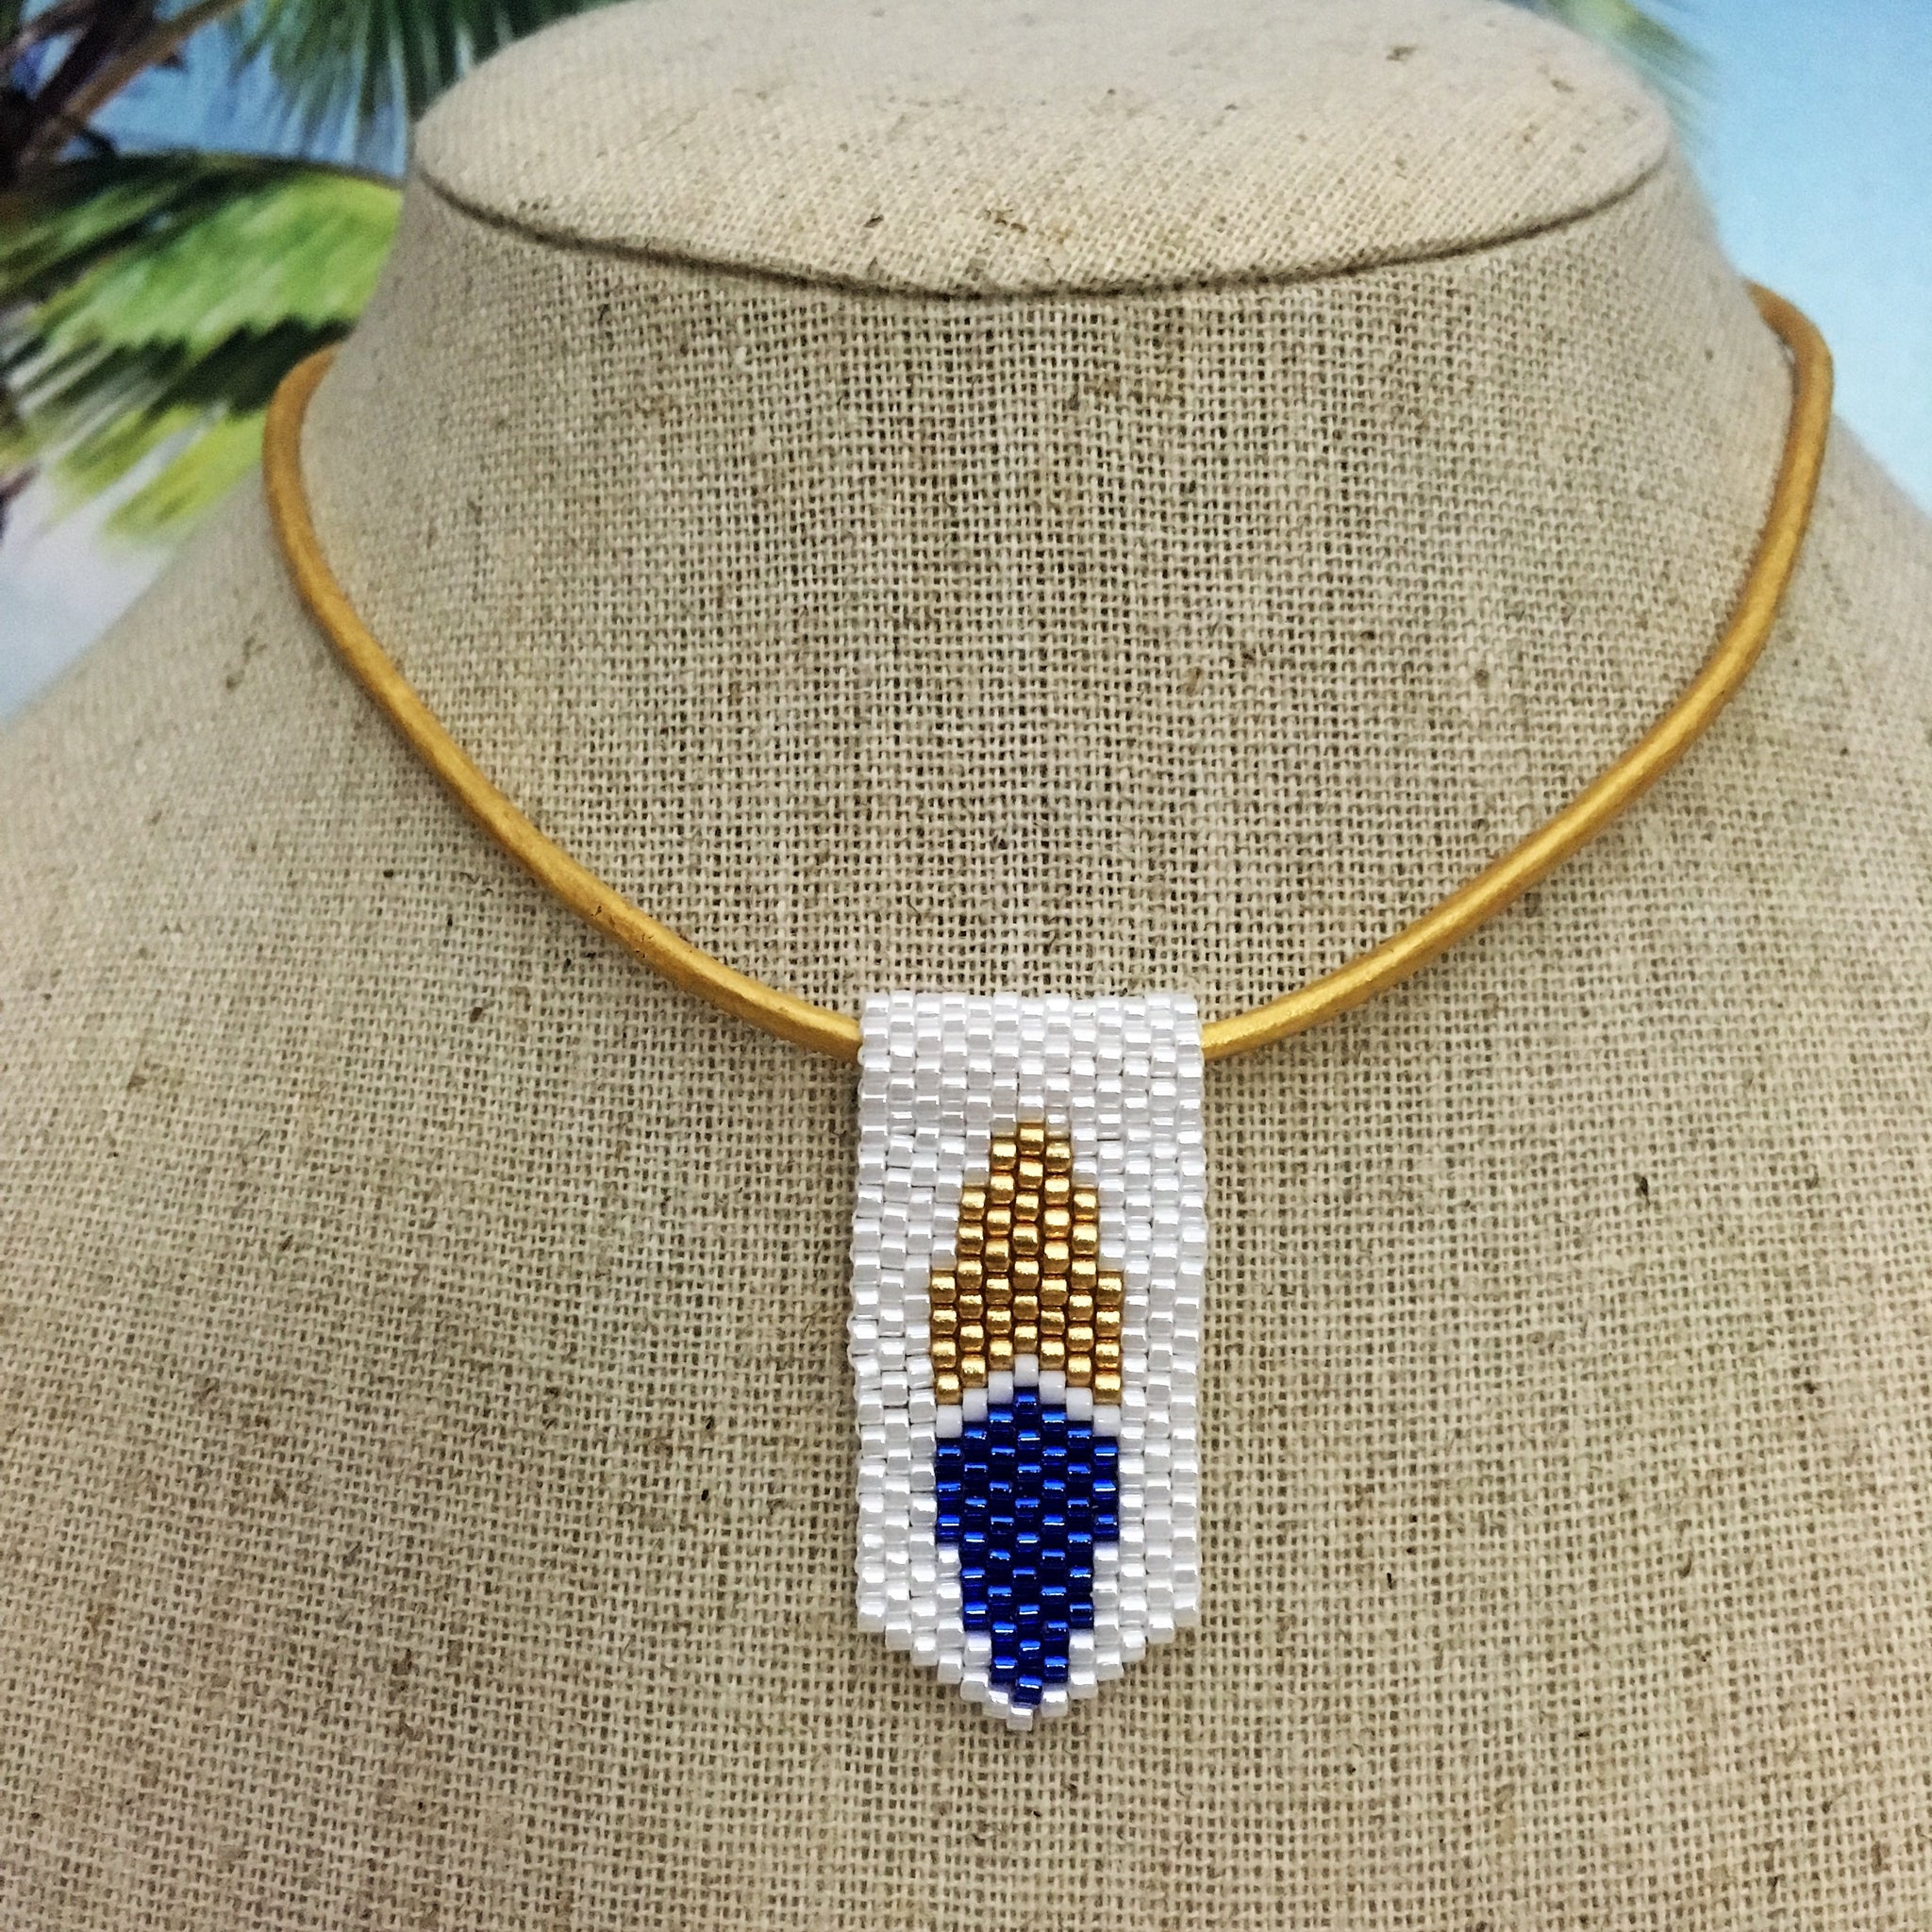 Handmade beaded mini surfboard pendant on leather cord blue white yellow gold 